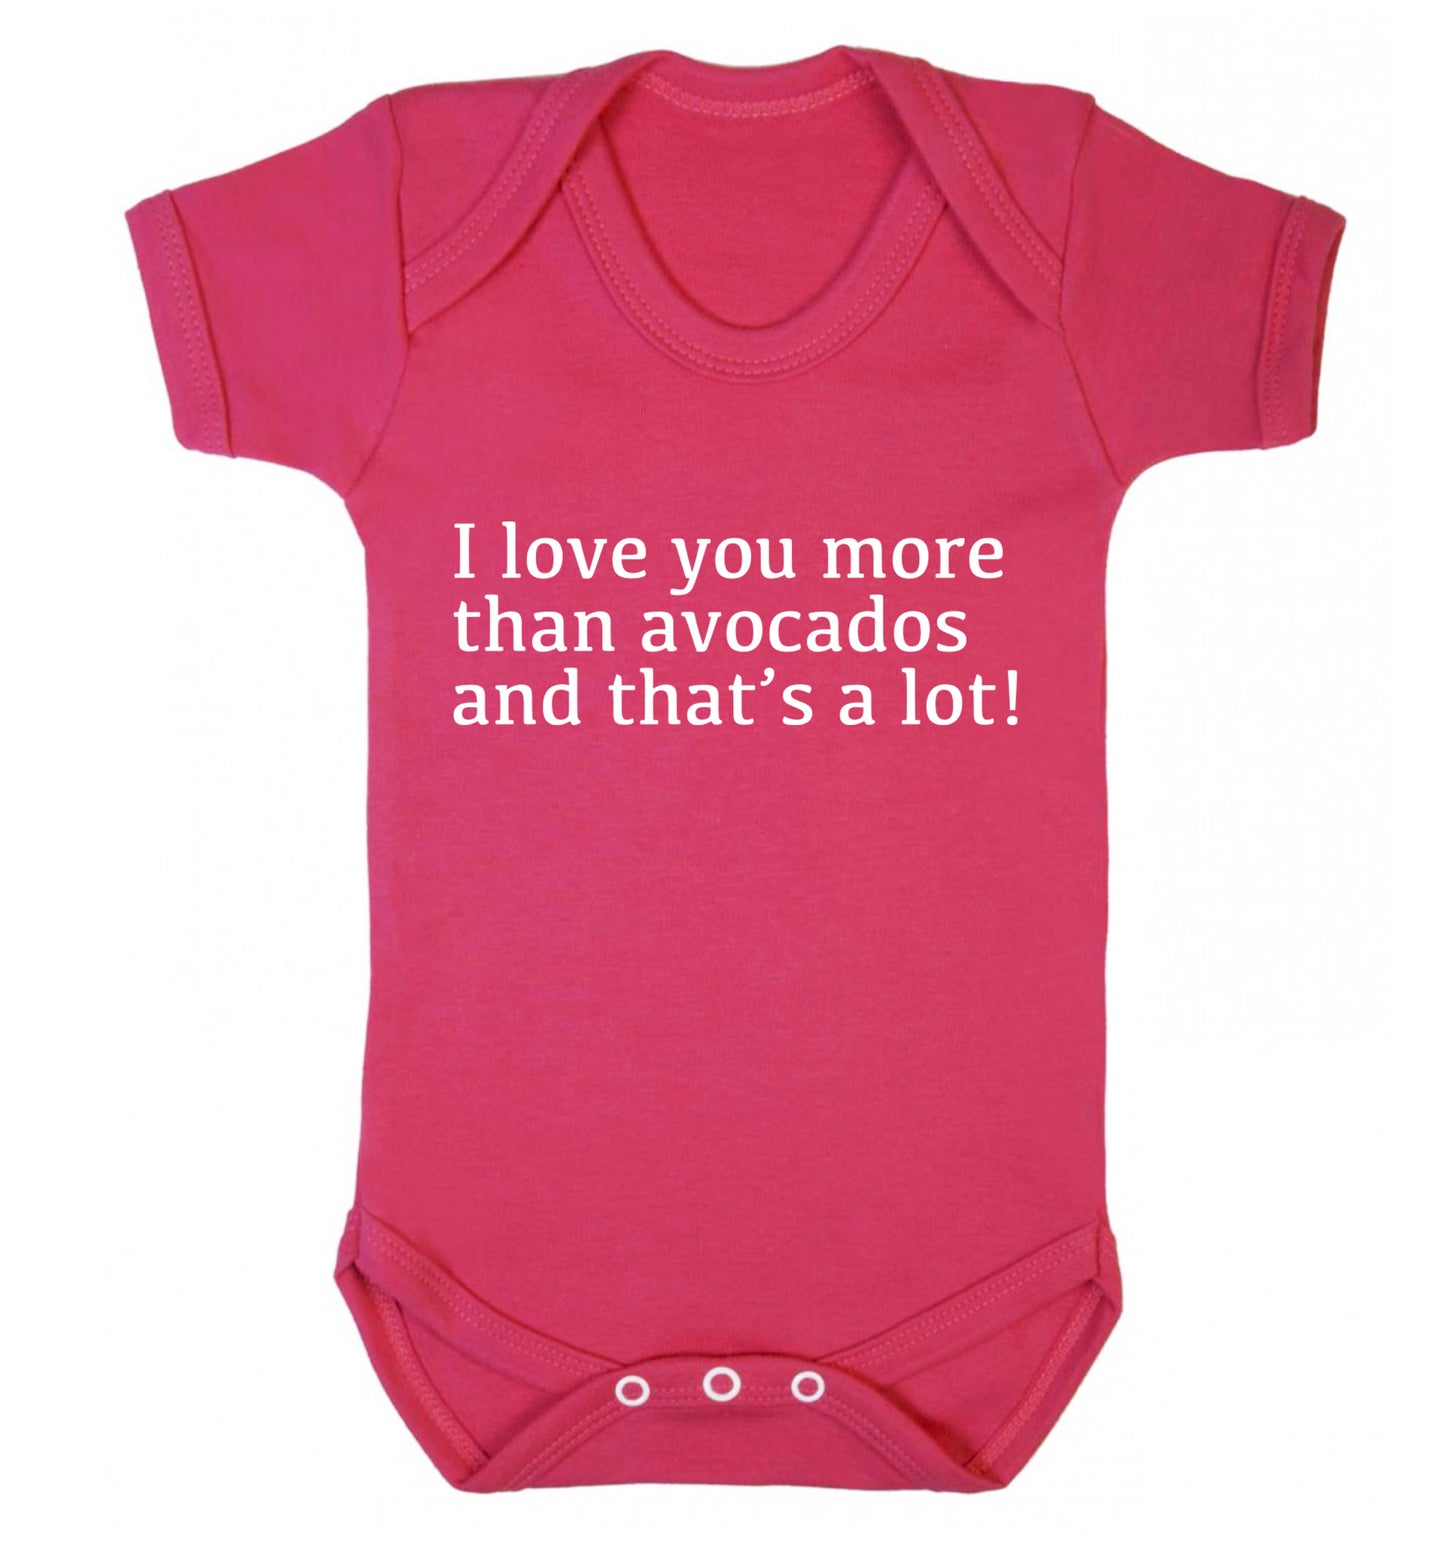 I love you more than avocados and that's a lot Baby Vest dark pink 18-24 months